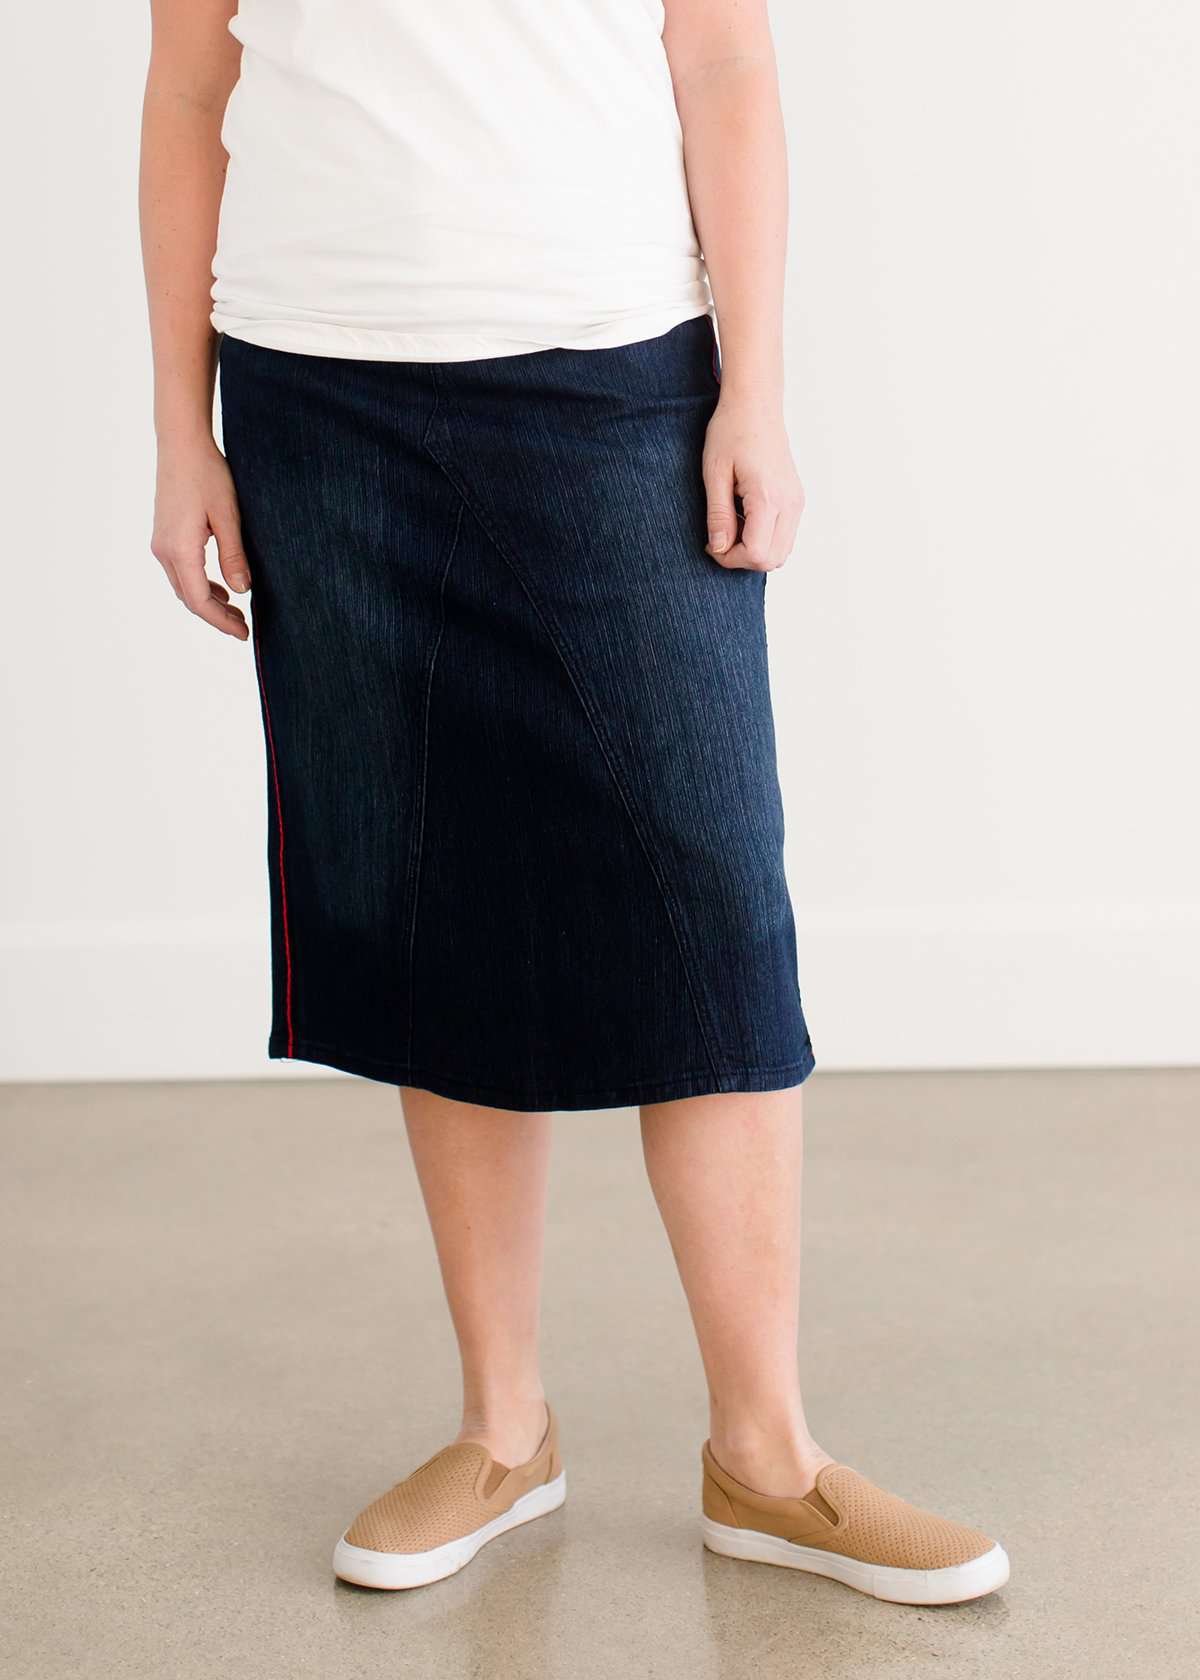 Woman wearing a dark indigo wash below the knee skirt that has red piping along the sides. She also is wearing a white tee shirt and tan sneakers.